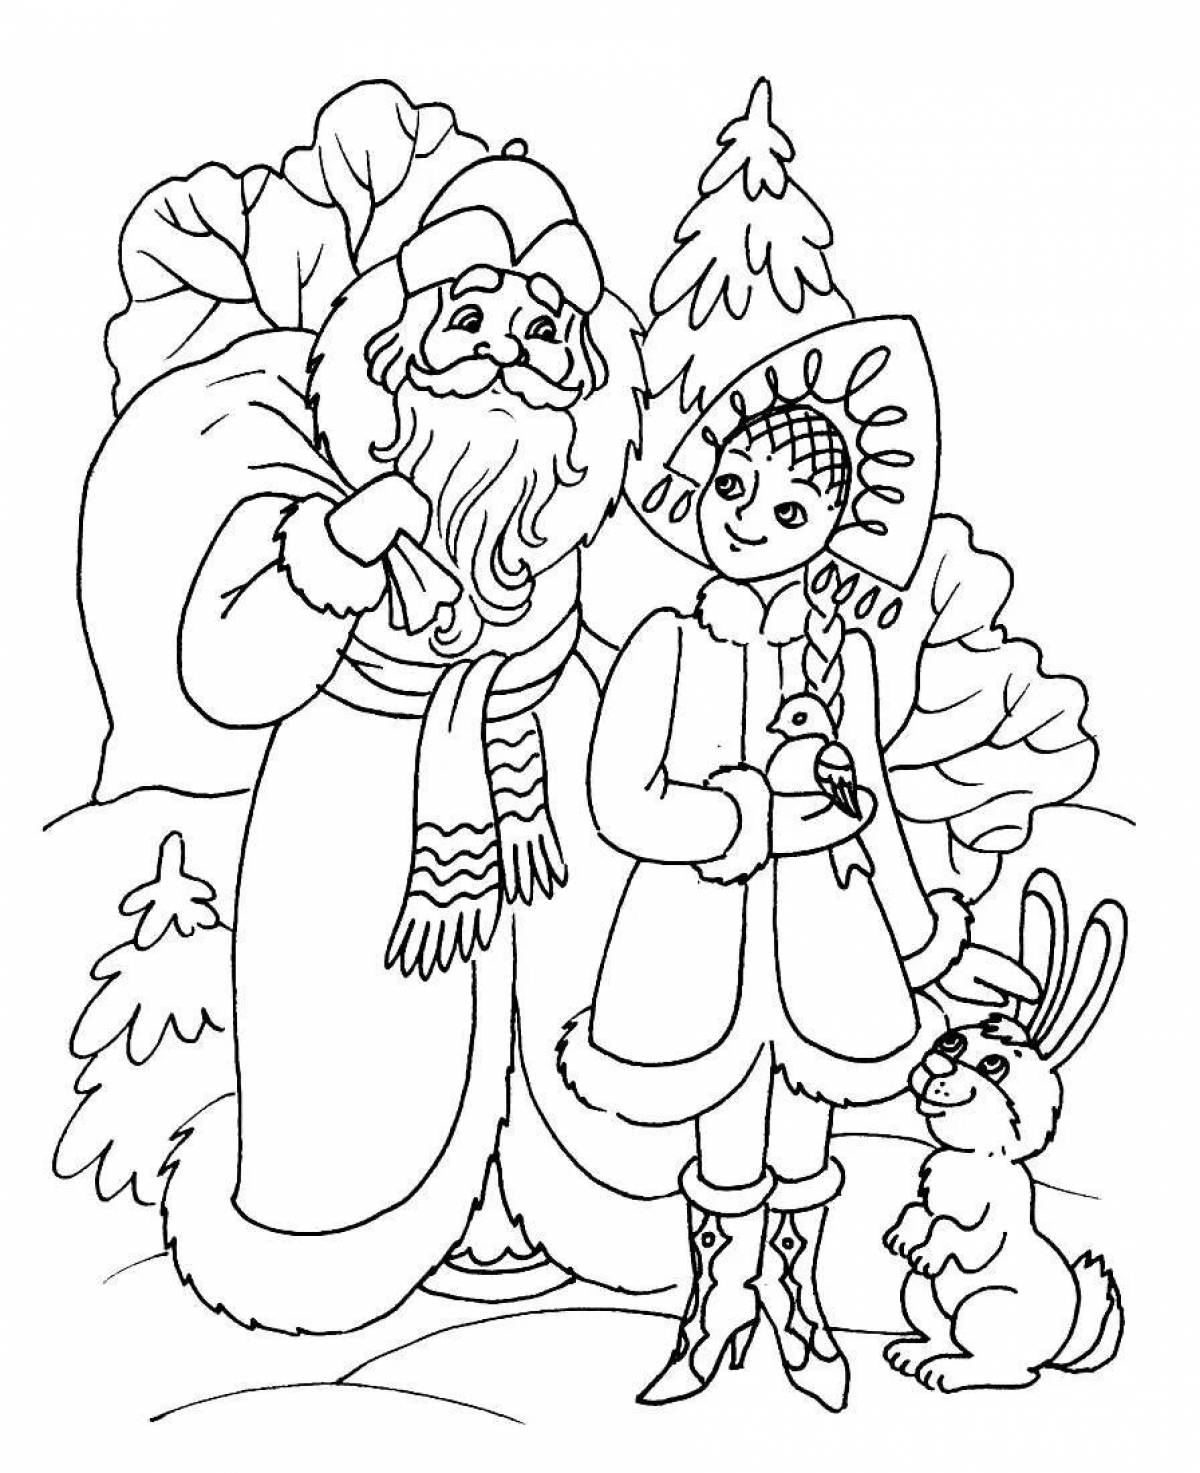 Santa Claus and Snow Maiden drawing #7